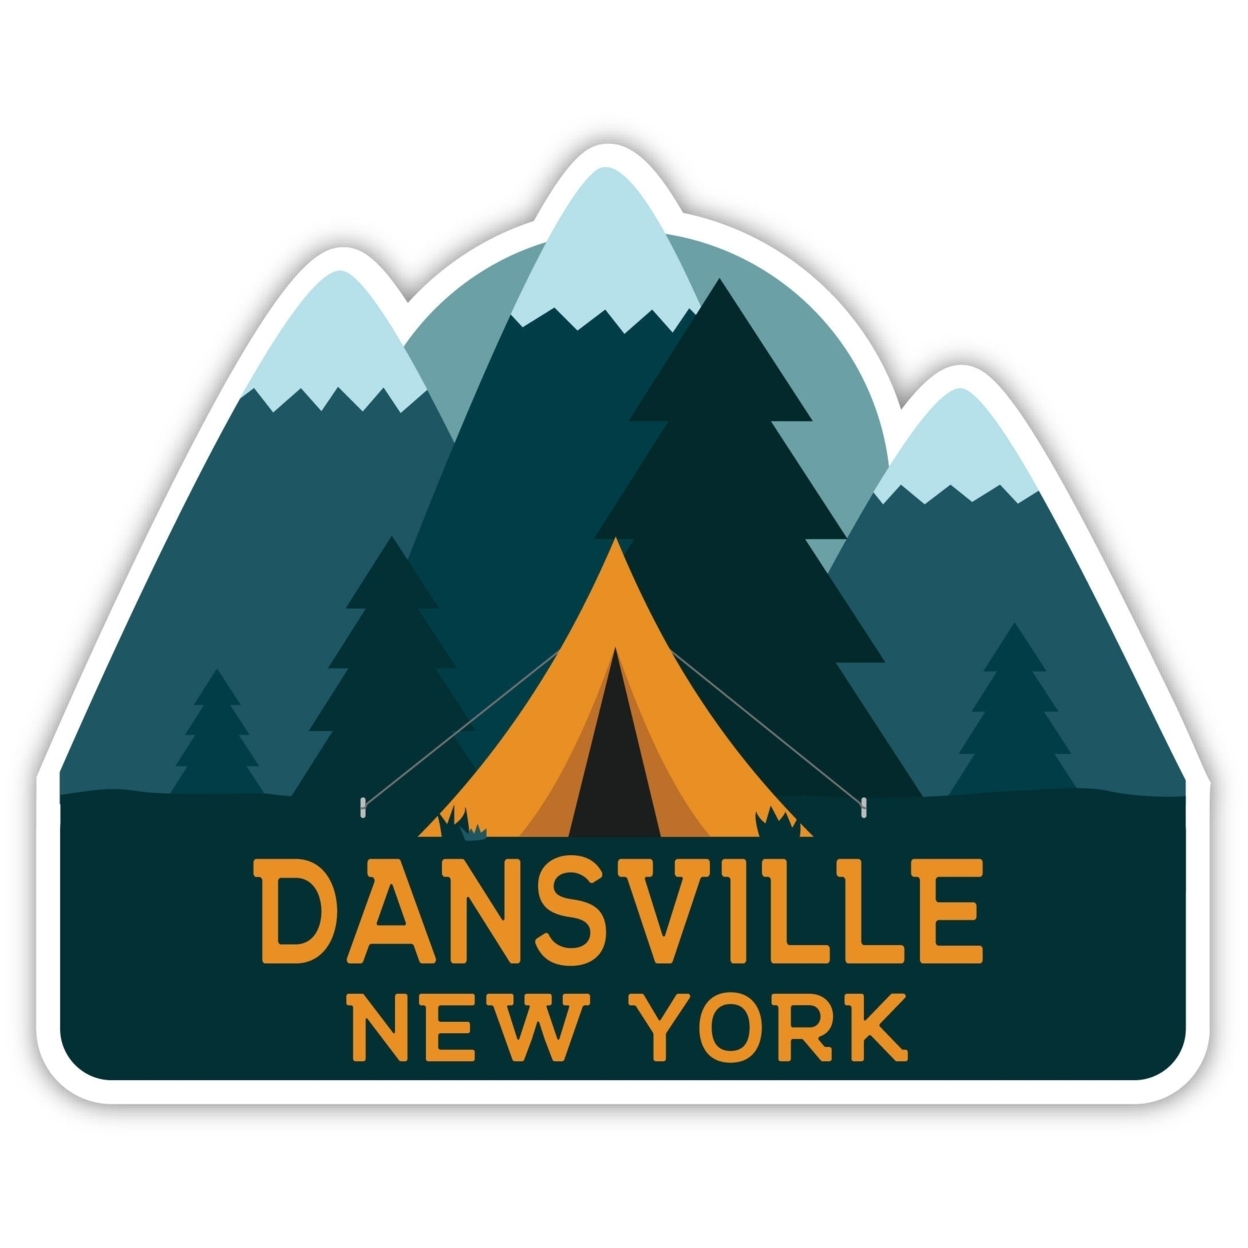 Dansville New York Souvenir Decorative Stickers (Choose Theme And Size) - 4-Pack, 4-Inch, Tent